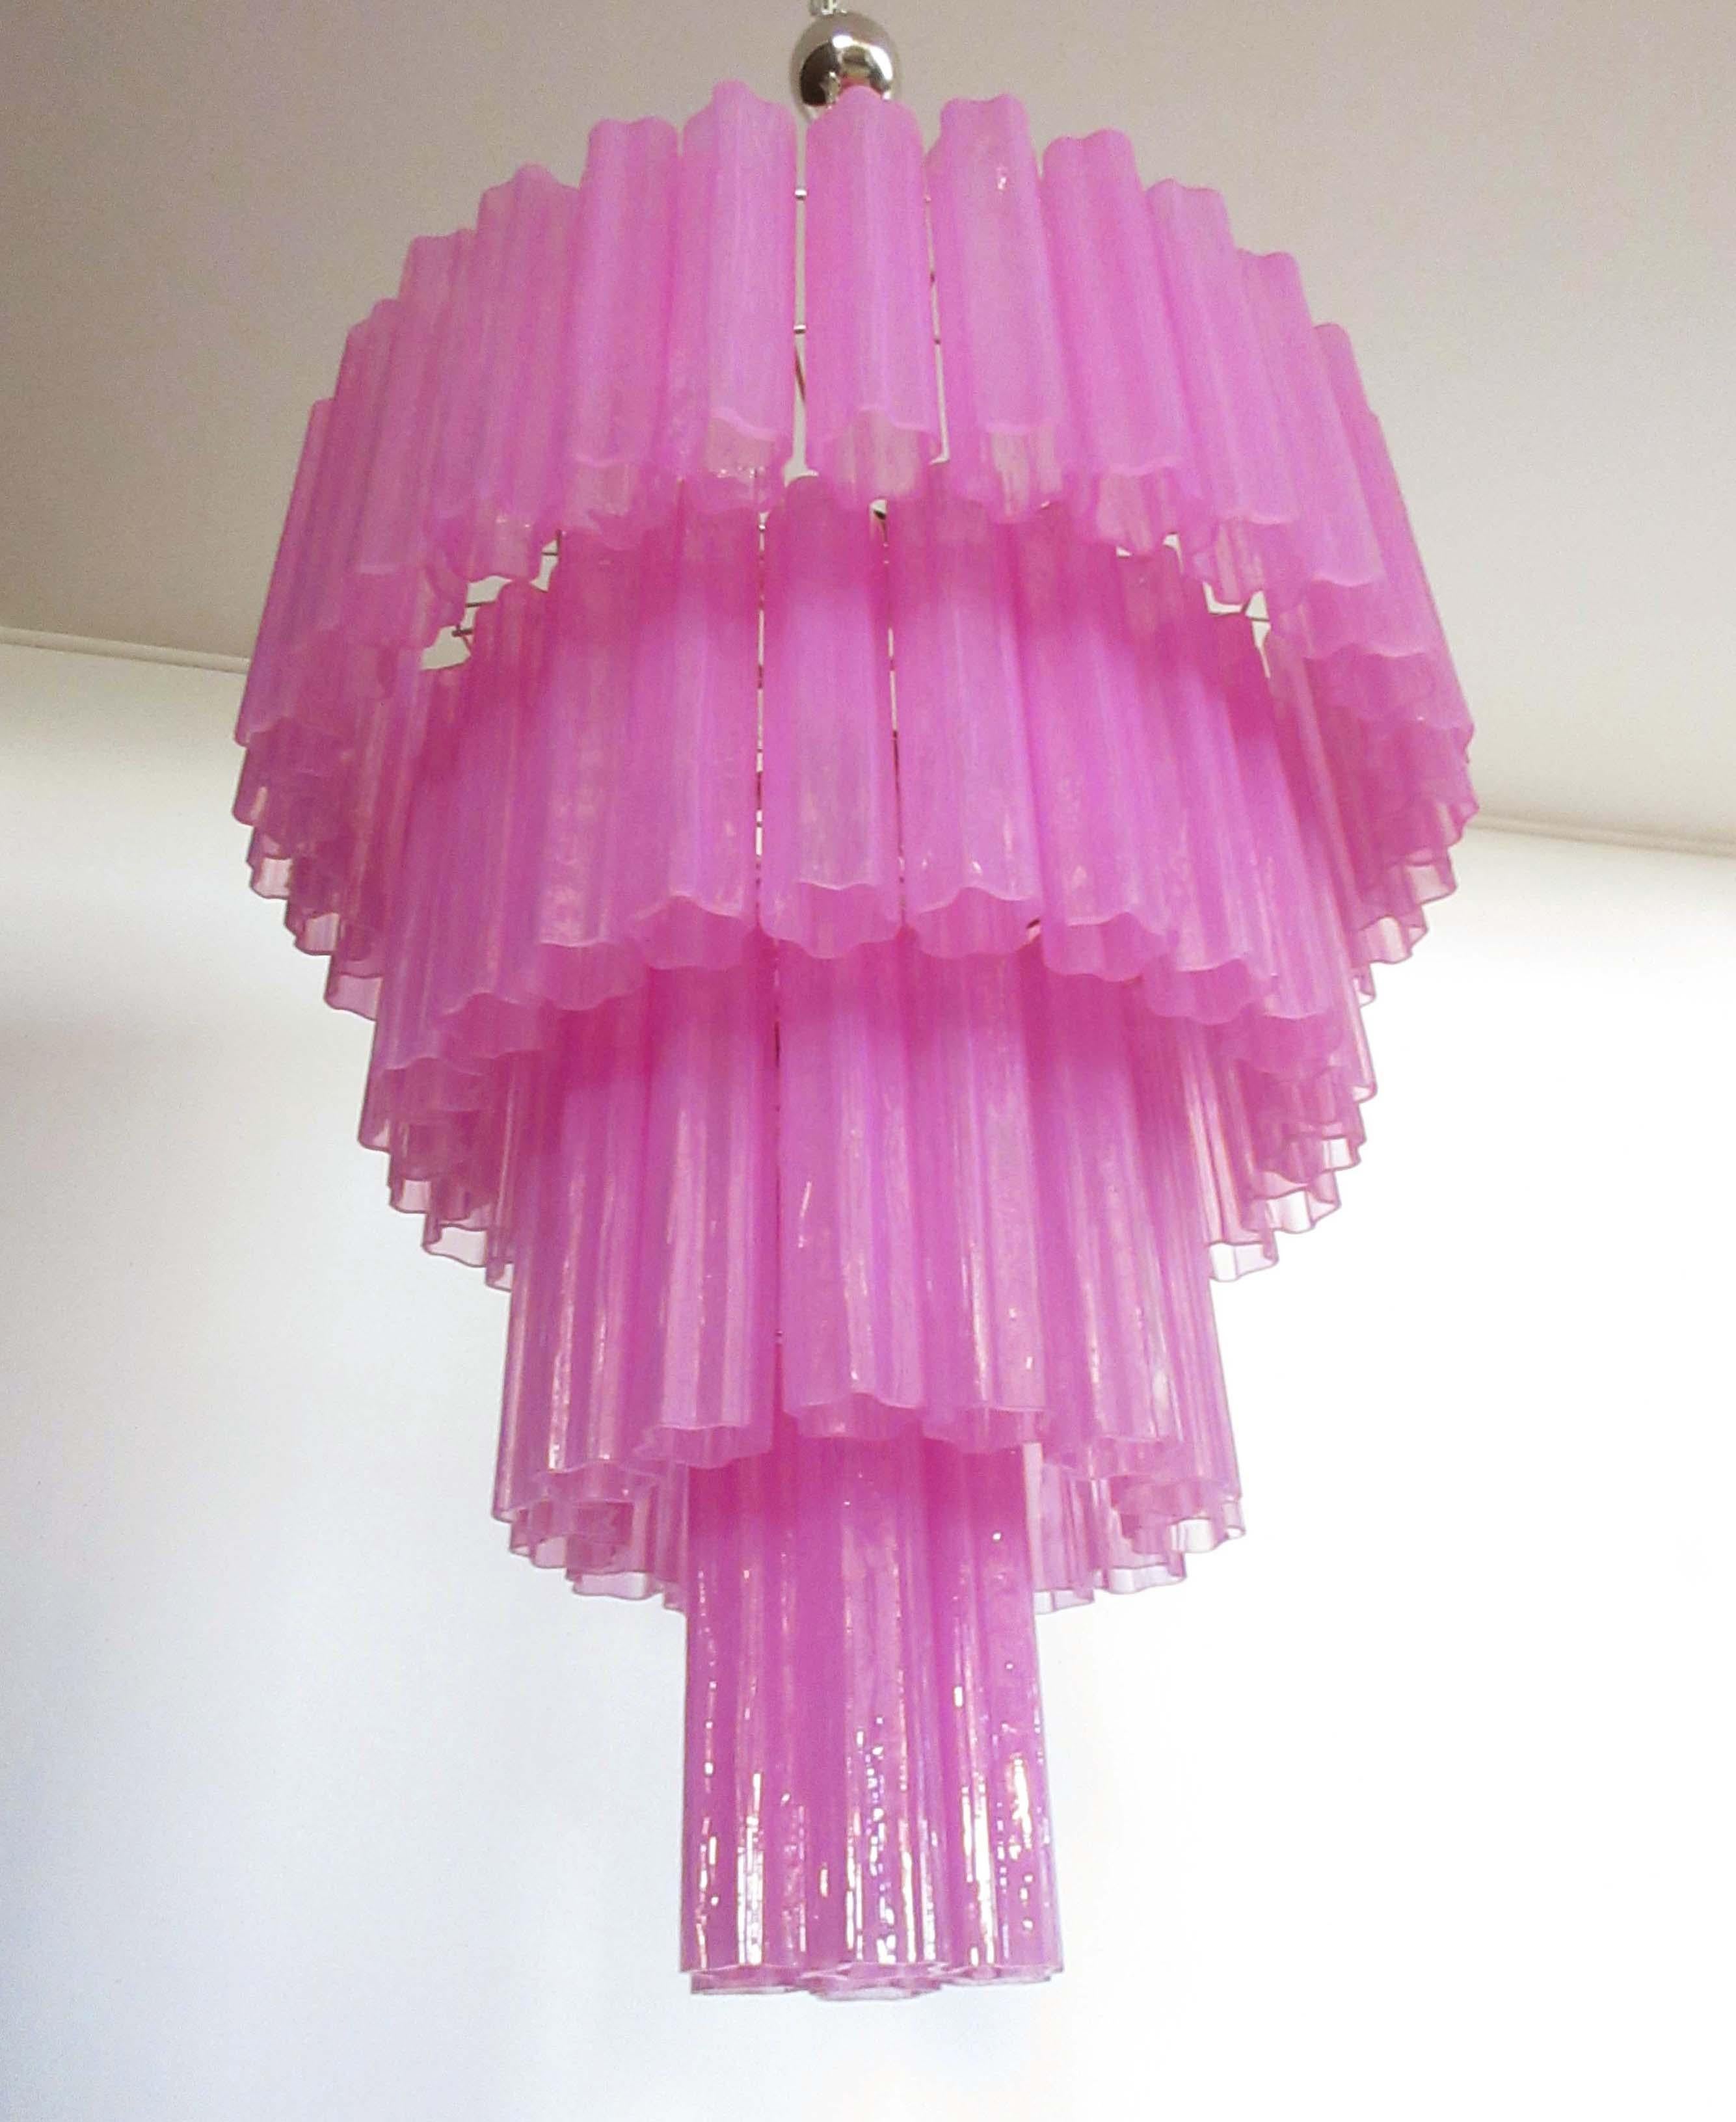 Late 20th Century Huge Vintage Murano Glass Tiered Chandelier - 78 glasses - pink fuxia silk